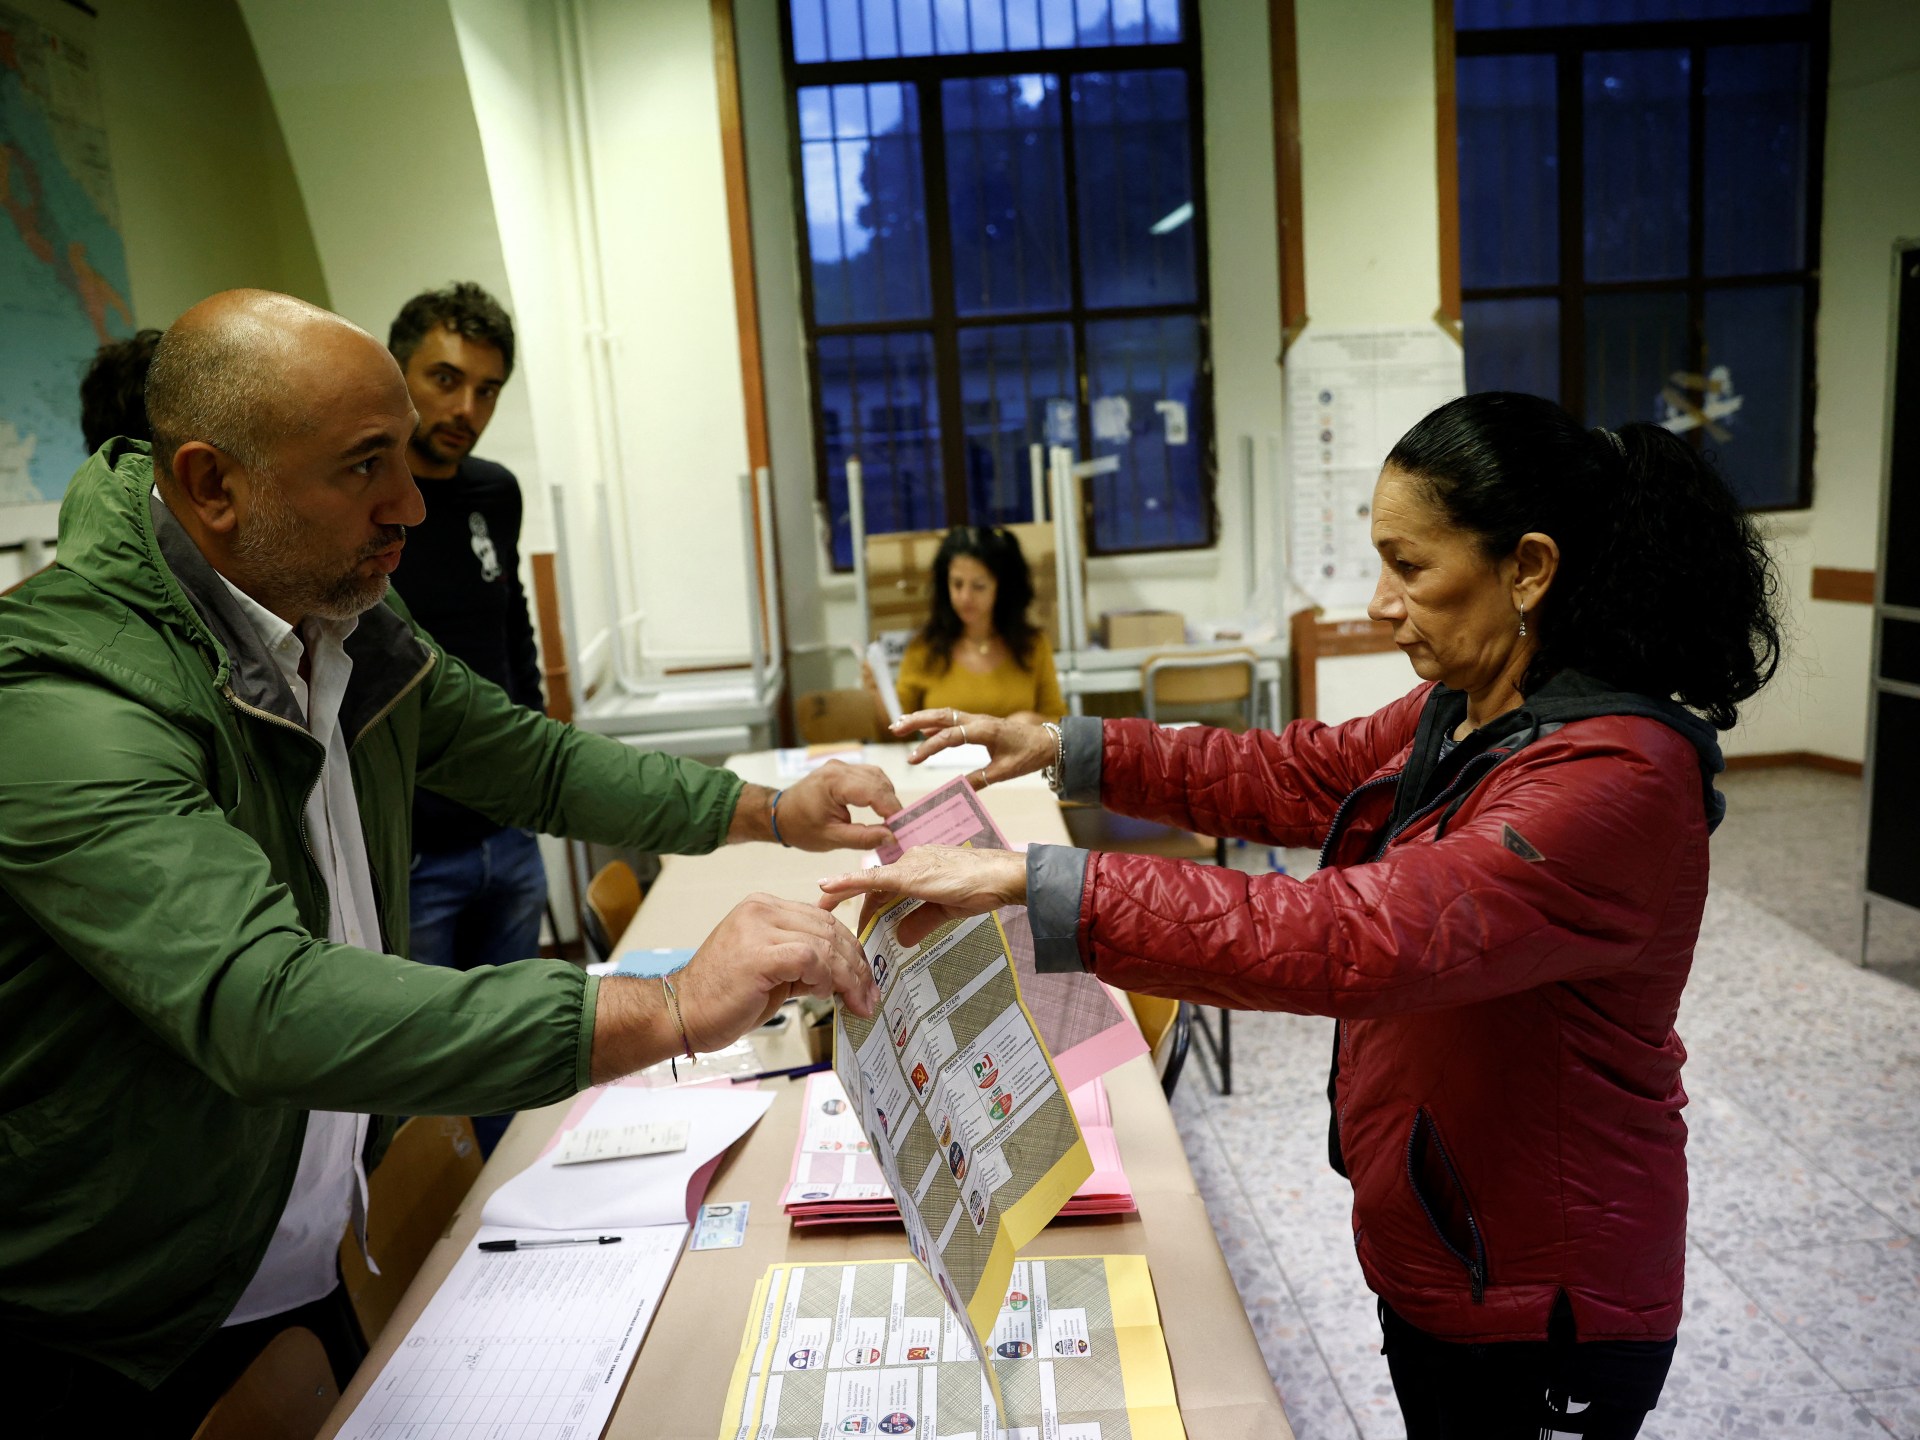 The polls open in Italy with the right-wing alliance poised for victory